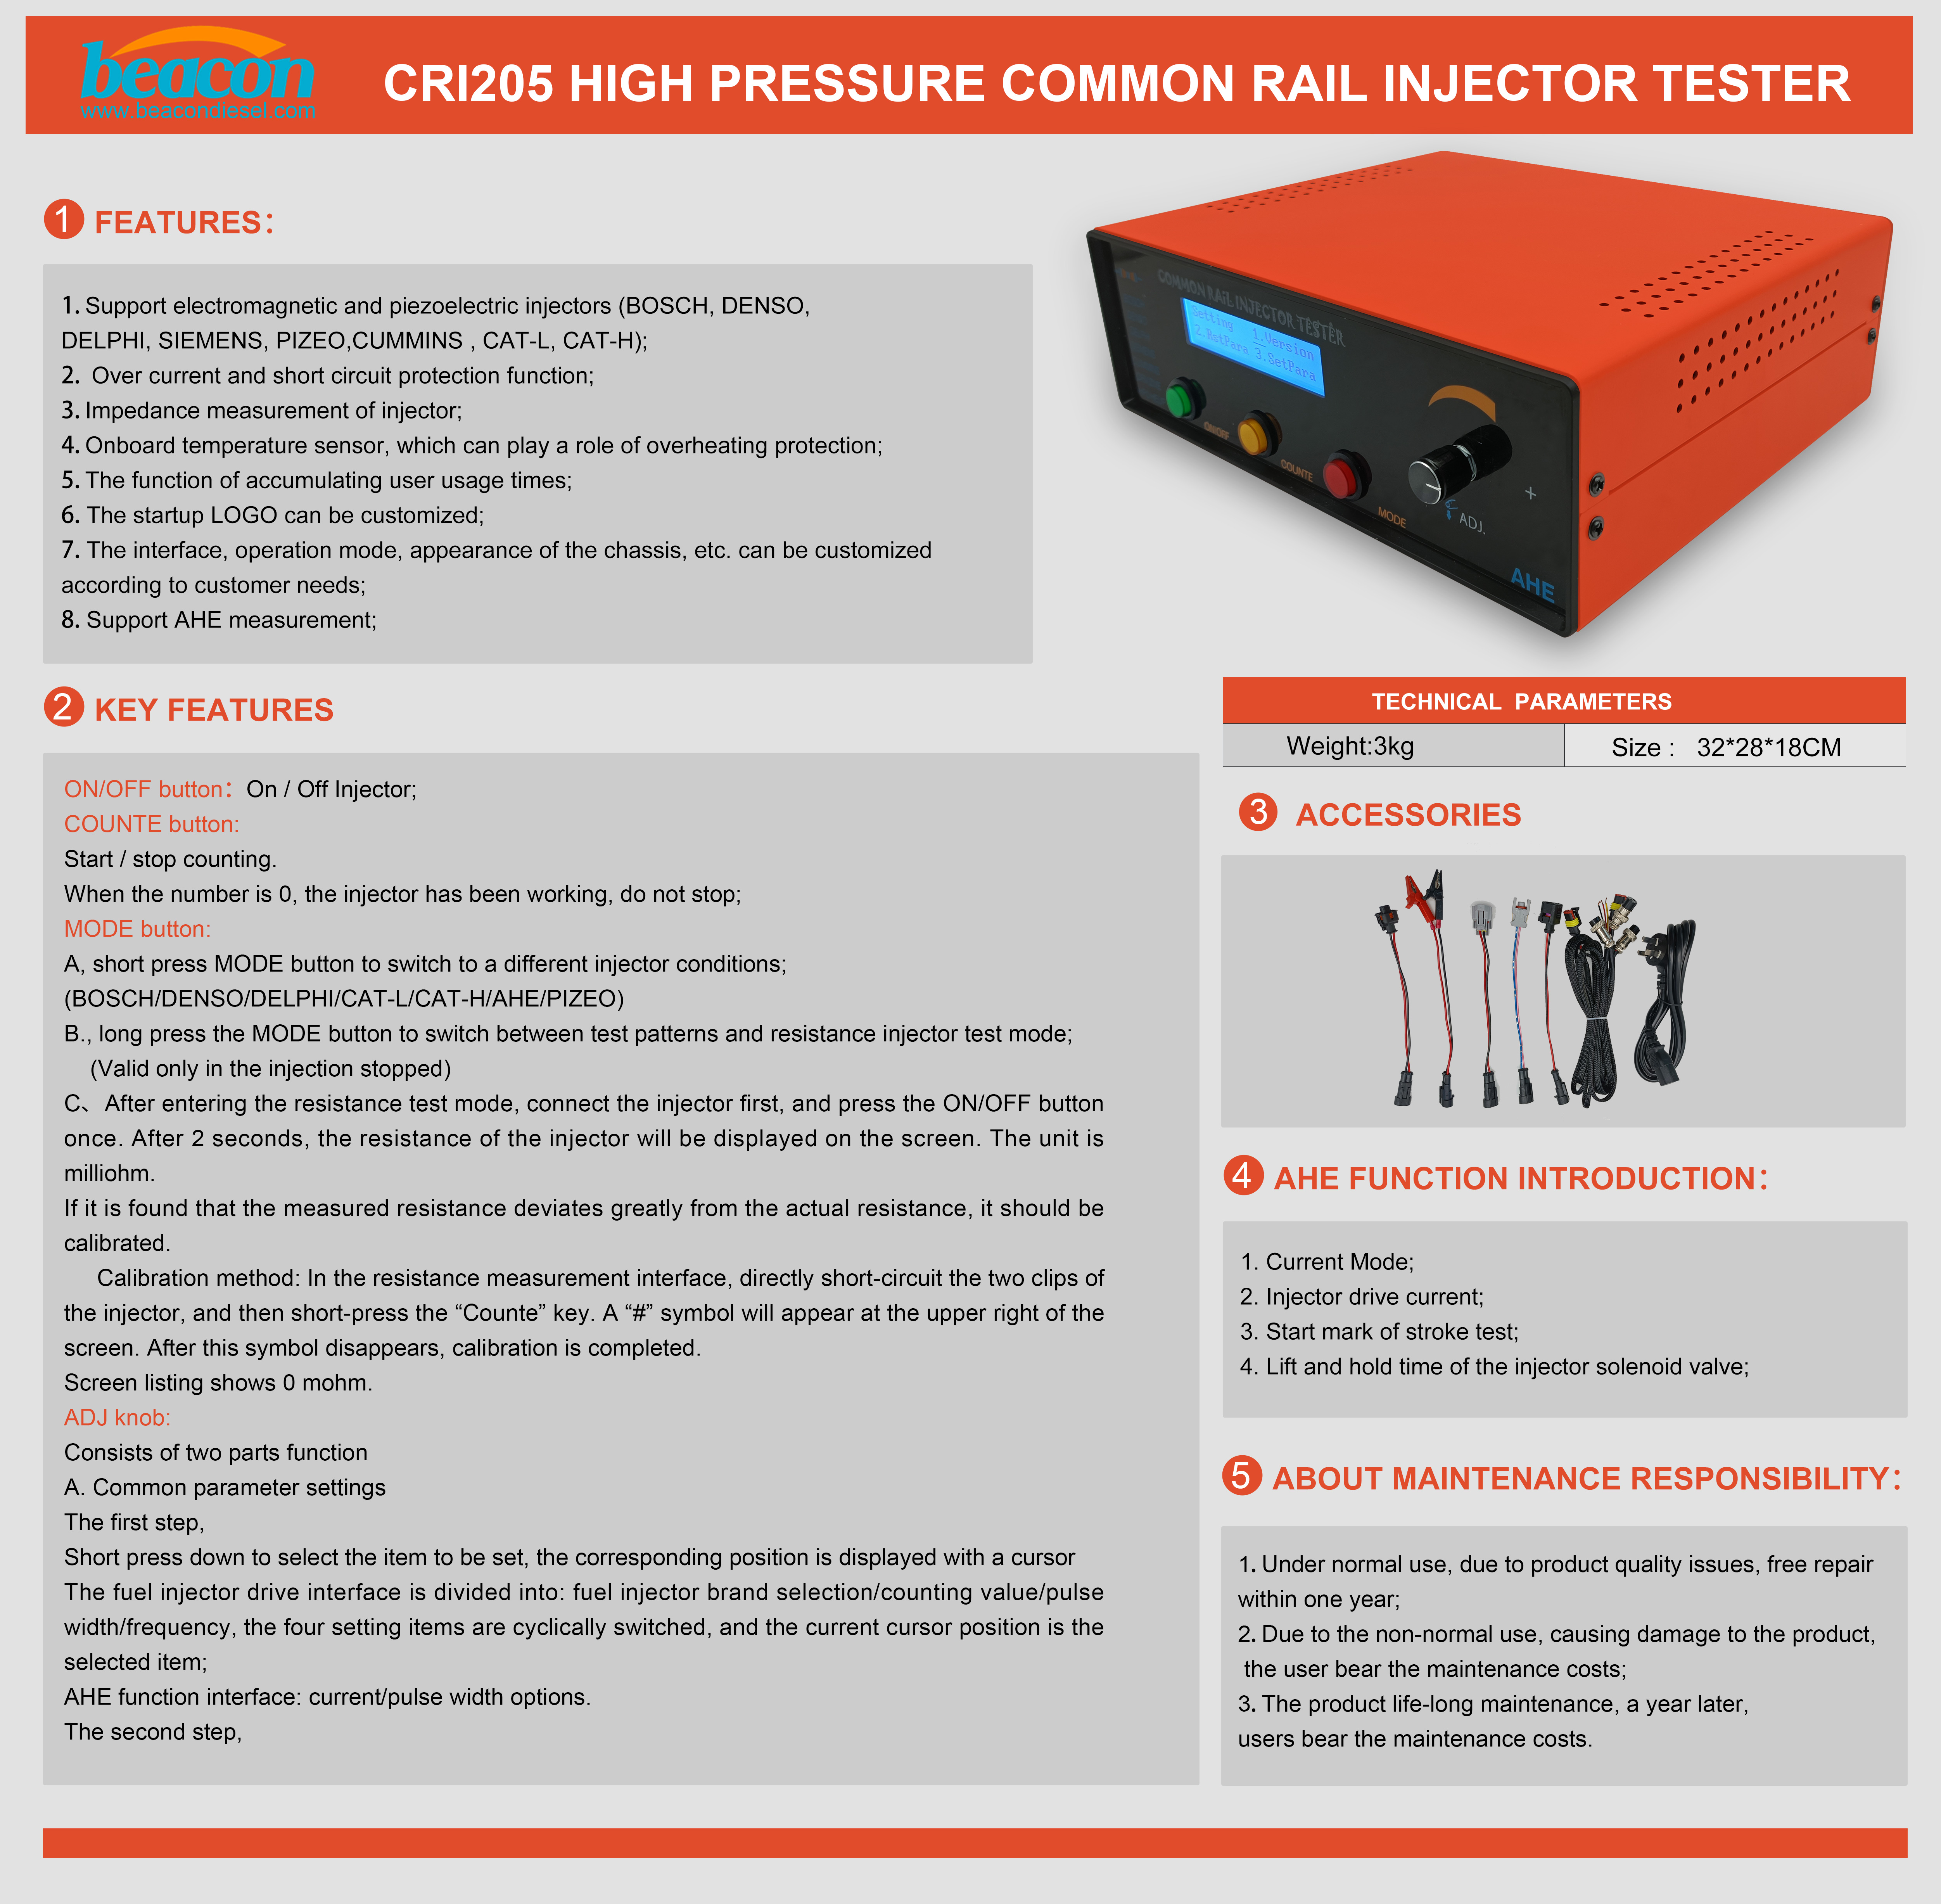 Beacon CRI205 Common Rail Injector Stroke Tester Multifunction Professional Diesel Fuel Injection Tester Toolsupports Electromagnetic And Piezoelectric Injectors And Supports Ahe Measurement